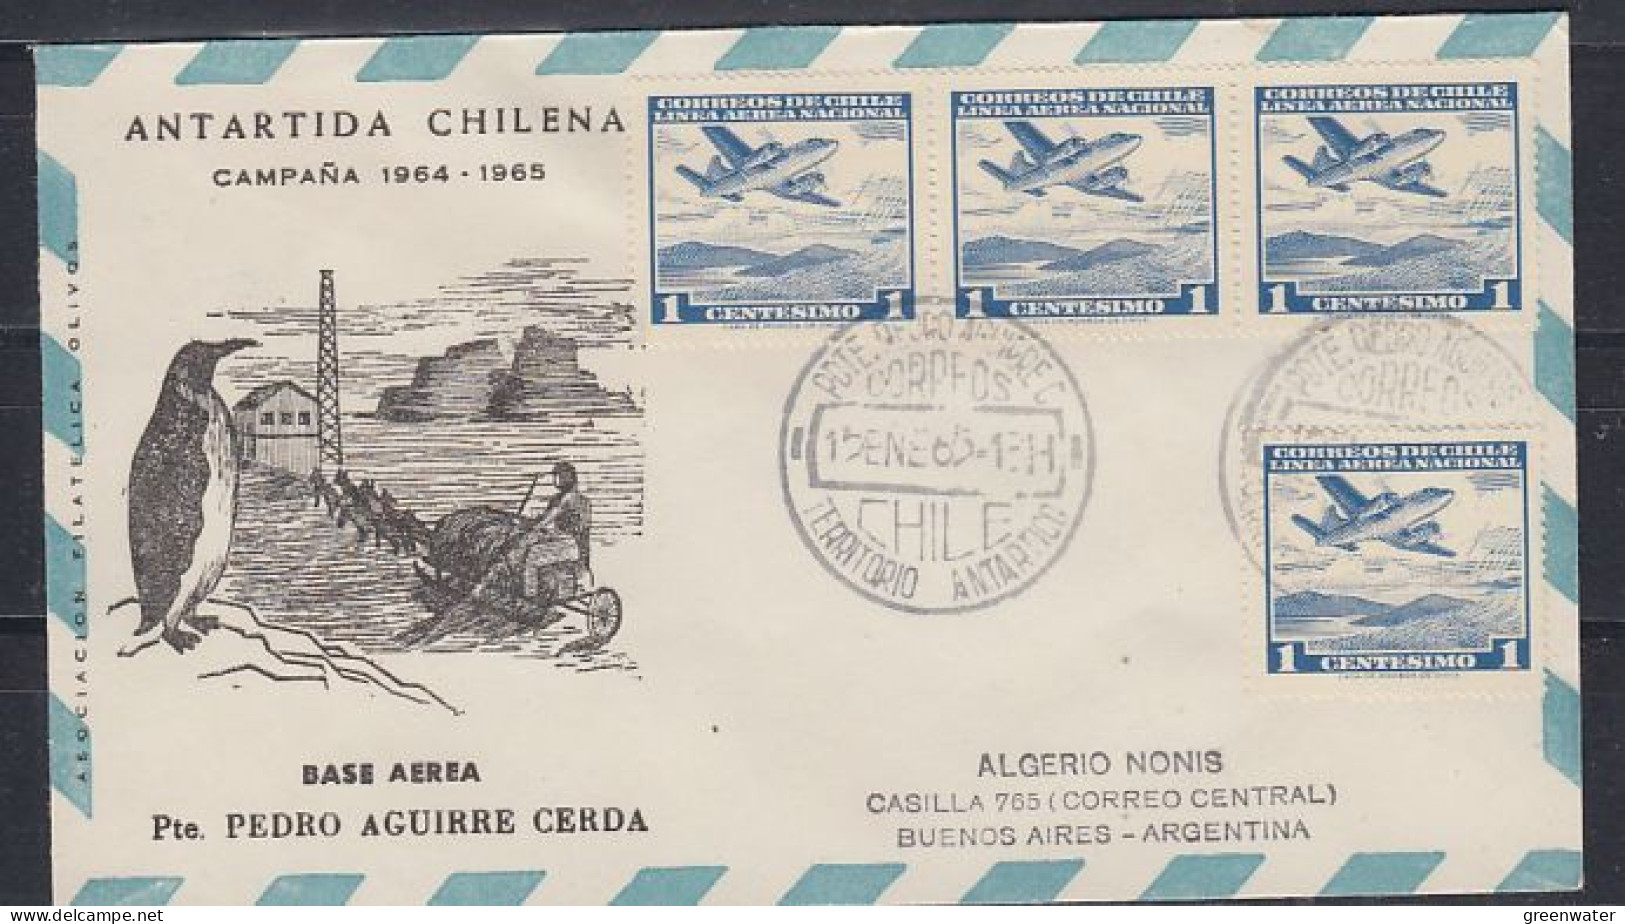 Chile Base Pte Pedro Aguirre Cerda Ca Base Cerda  15 JAN 1965 (59800) - Research Stations